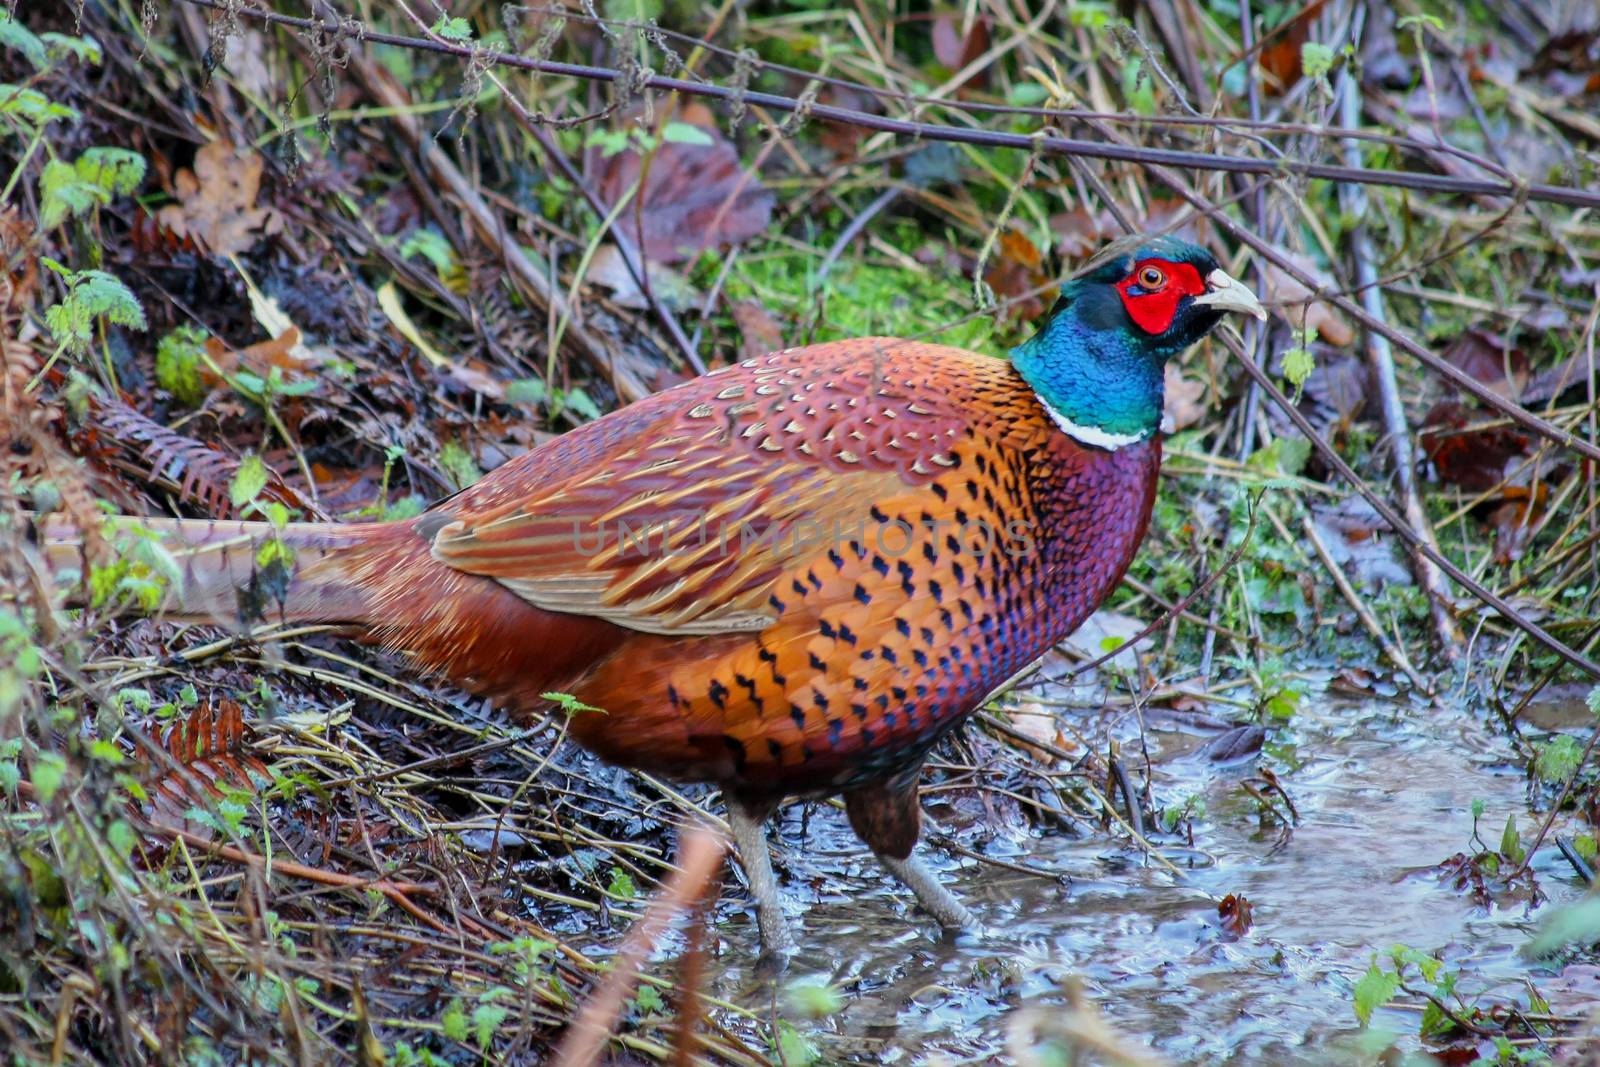 Pheasant standing in a muudy pool of water by phil_bird